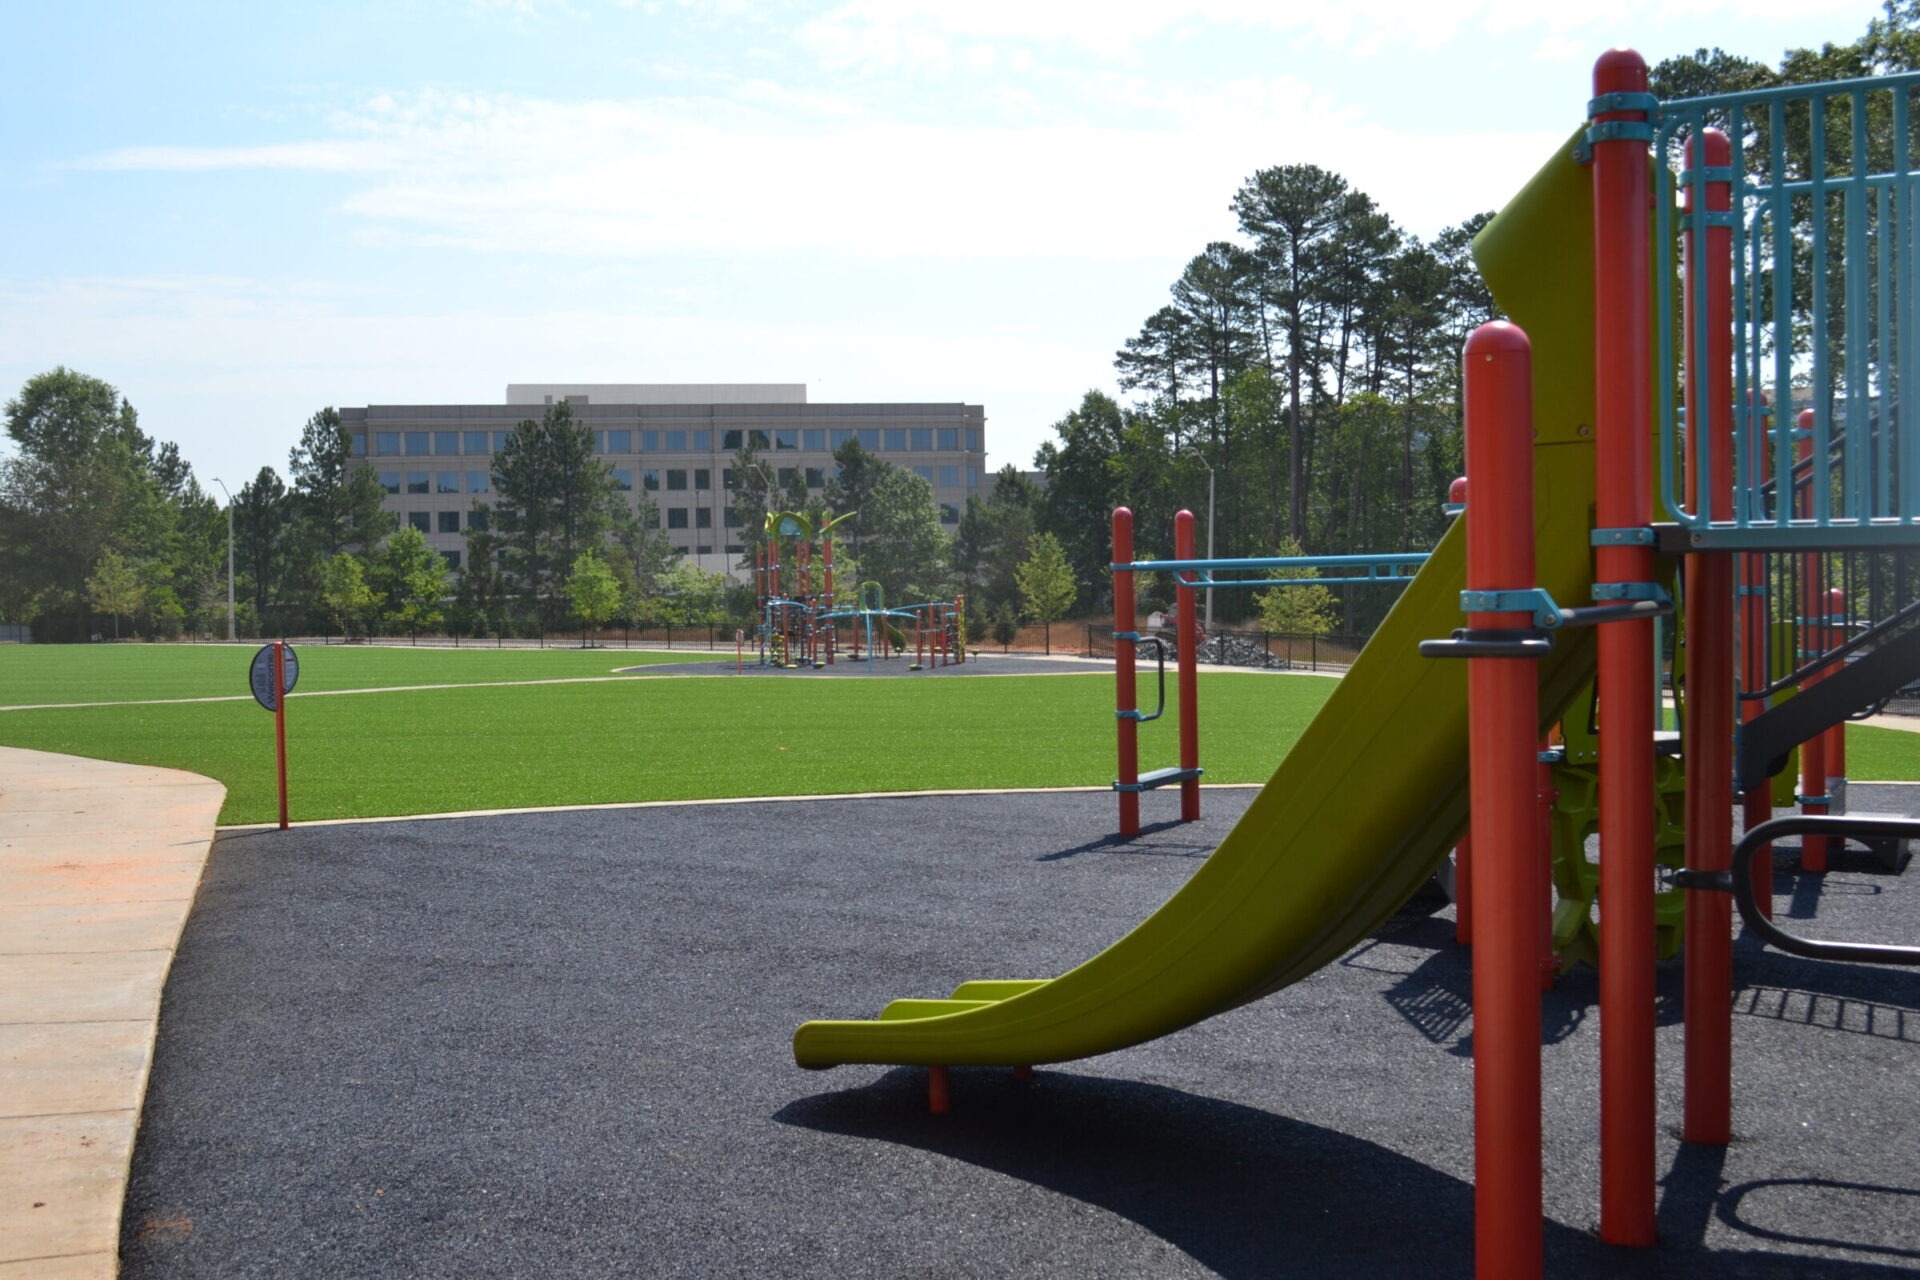 A colorful playground with green synthetic turf features a yellow slide, climbing structures, and outdoor fitness equipment, with trees and a building in the background.